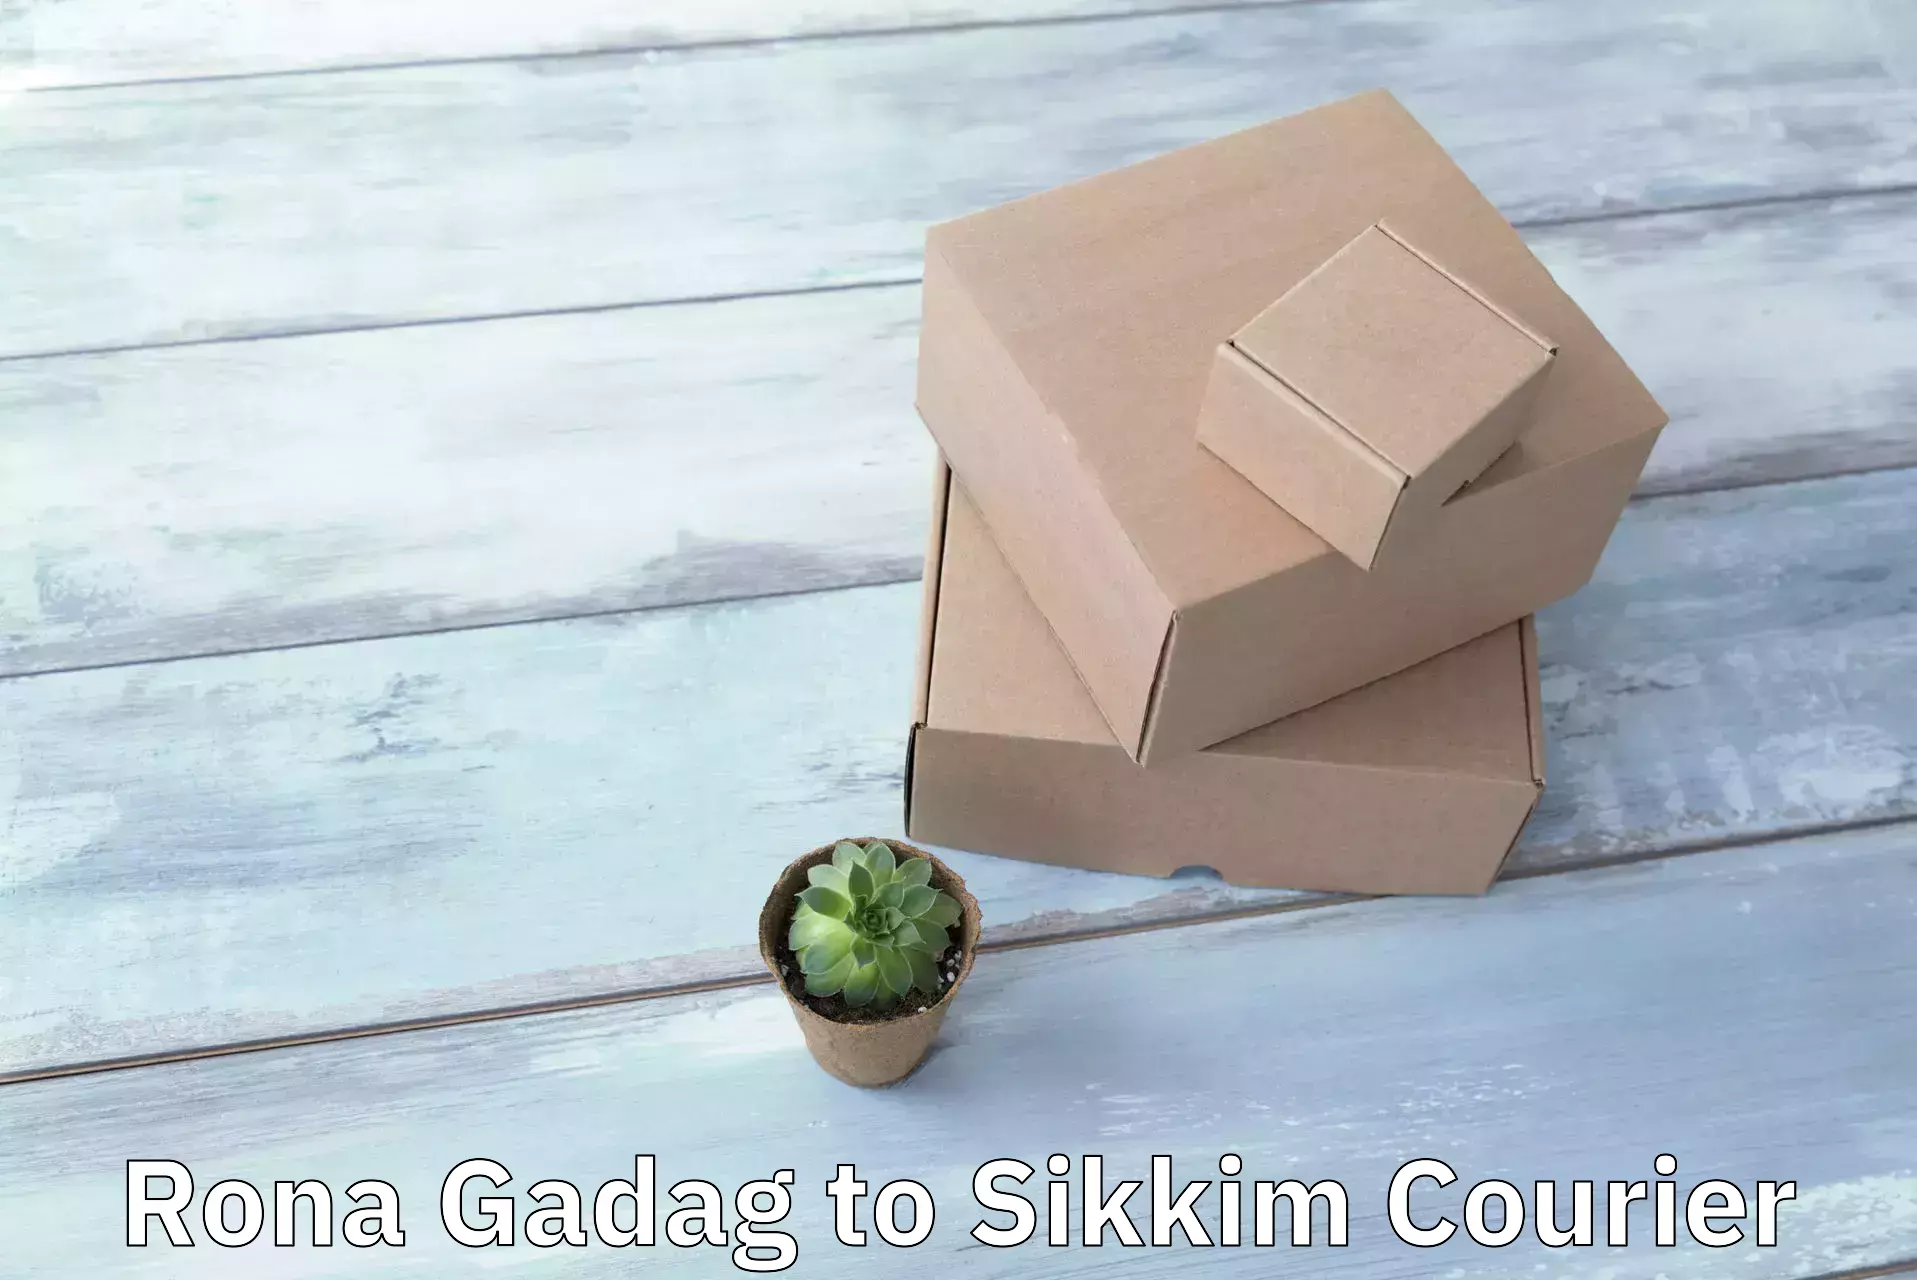 Global shipping solutions Rona Gadag to Sikkim